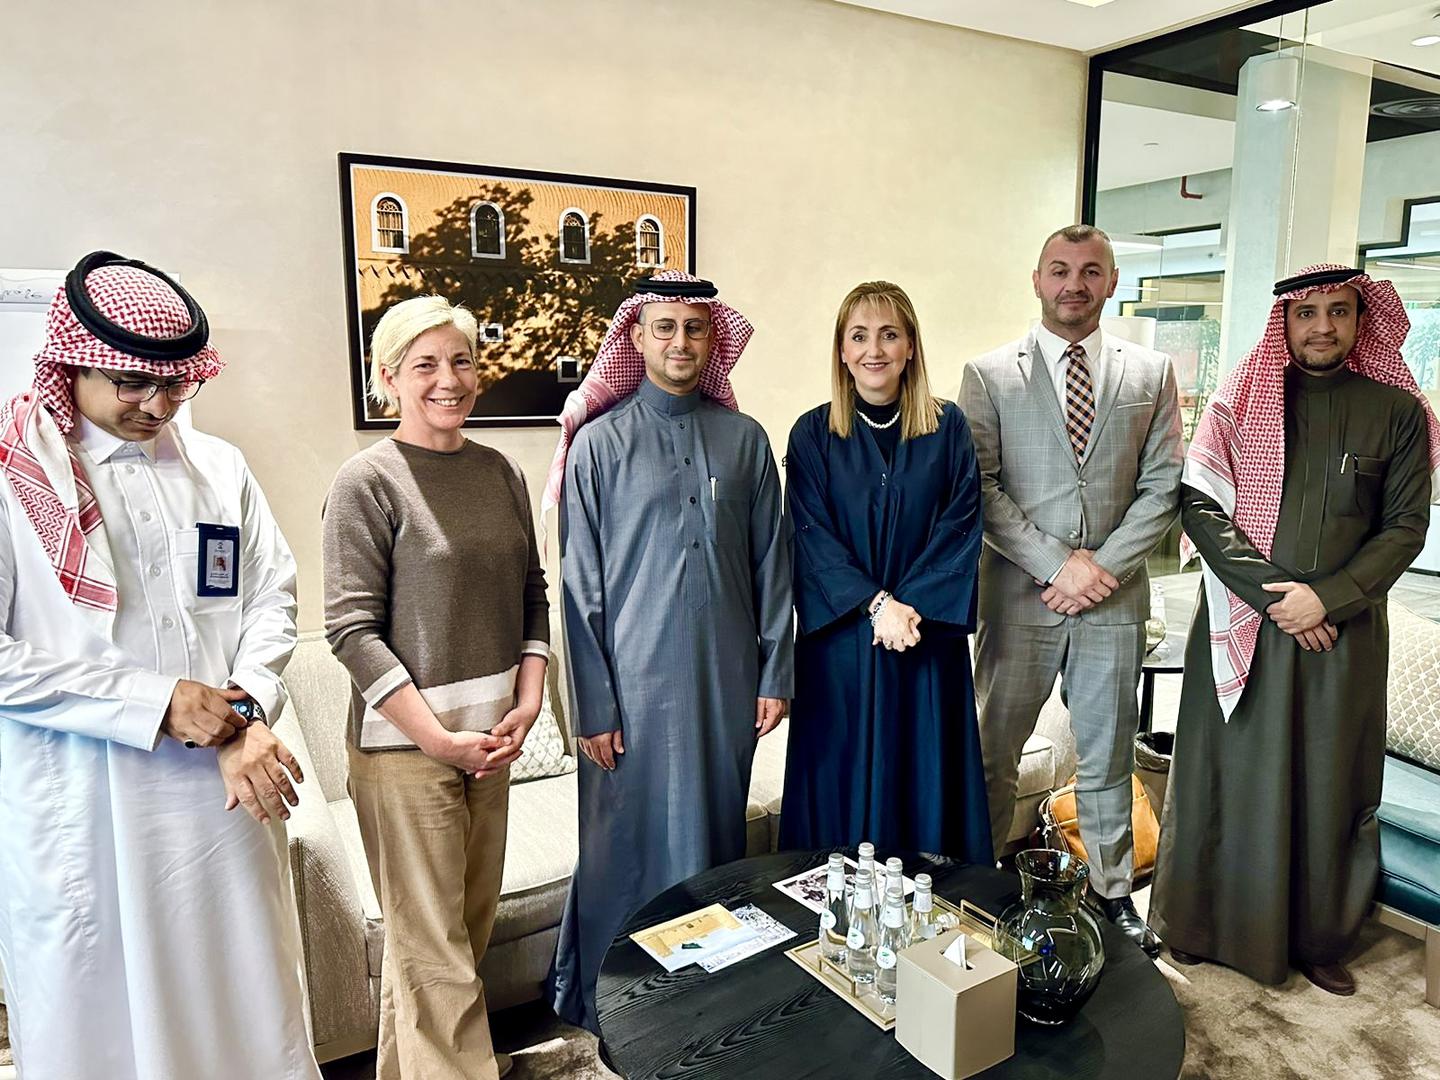 OACM delegation meeting Kingdom of Saudi Arabia,Riyadh -  OACM President Kristijan Curavic with HE Gloria Guevara Manzo Chief Special Advisor Ministry of Tourism, Red Sea Authority Chief Executive Officer Mr Mohammed Asiri and colleagues